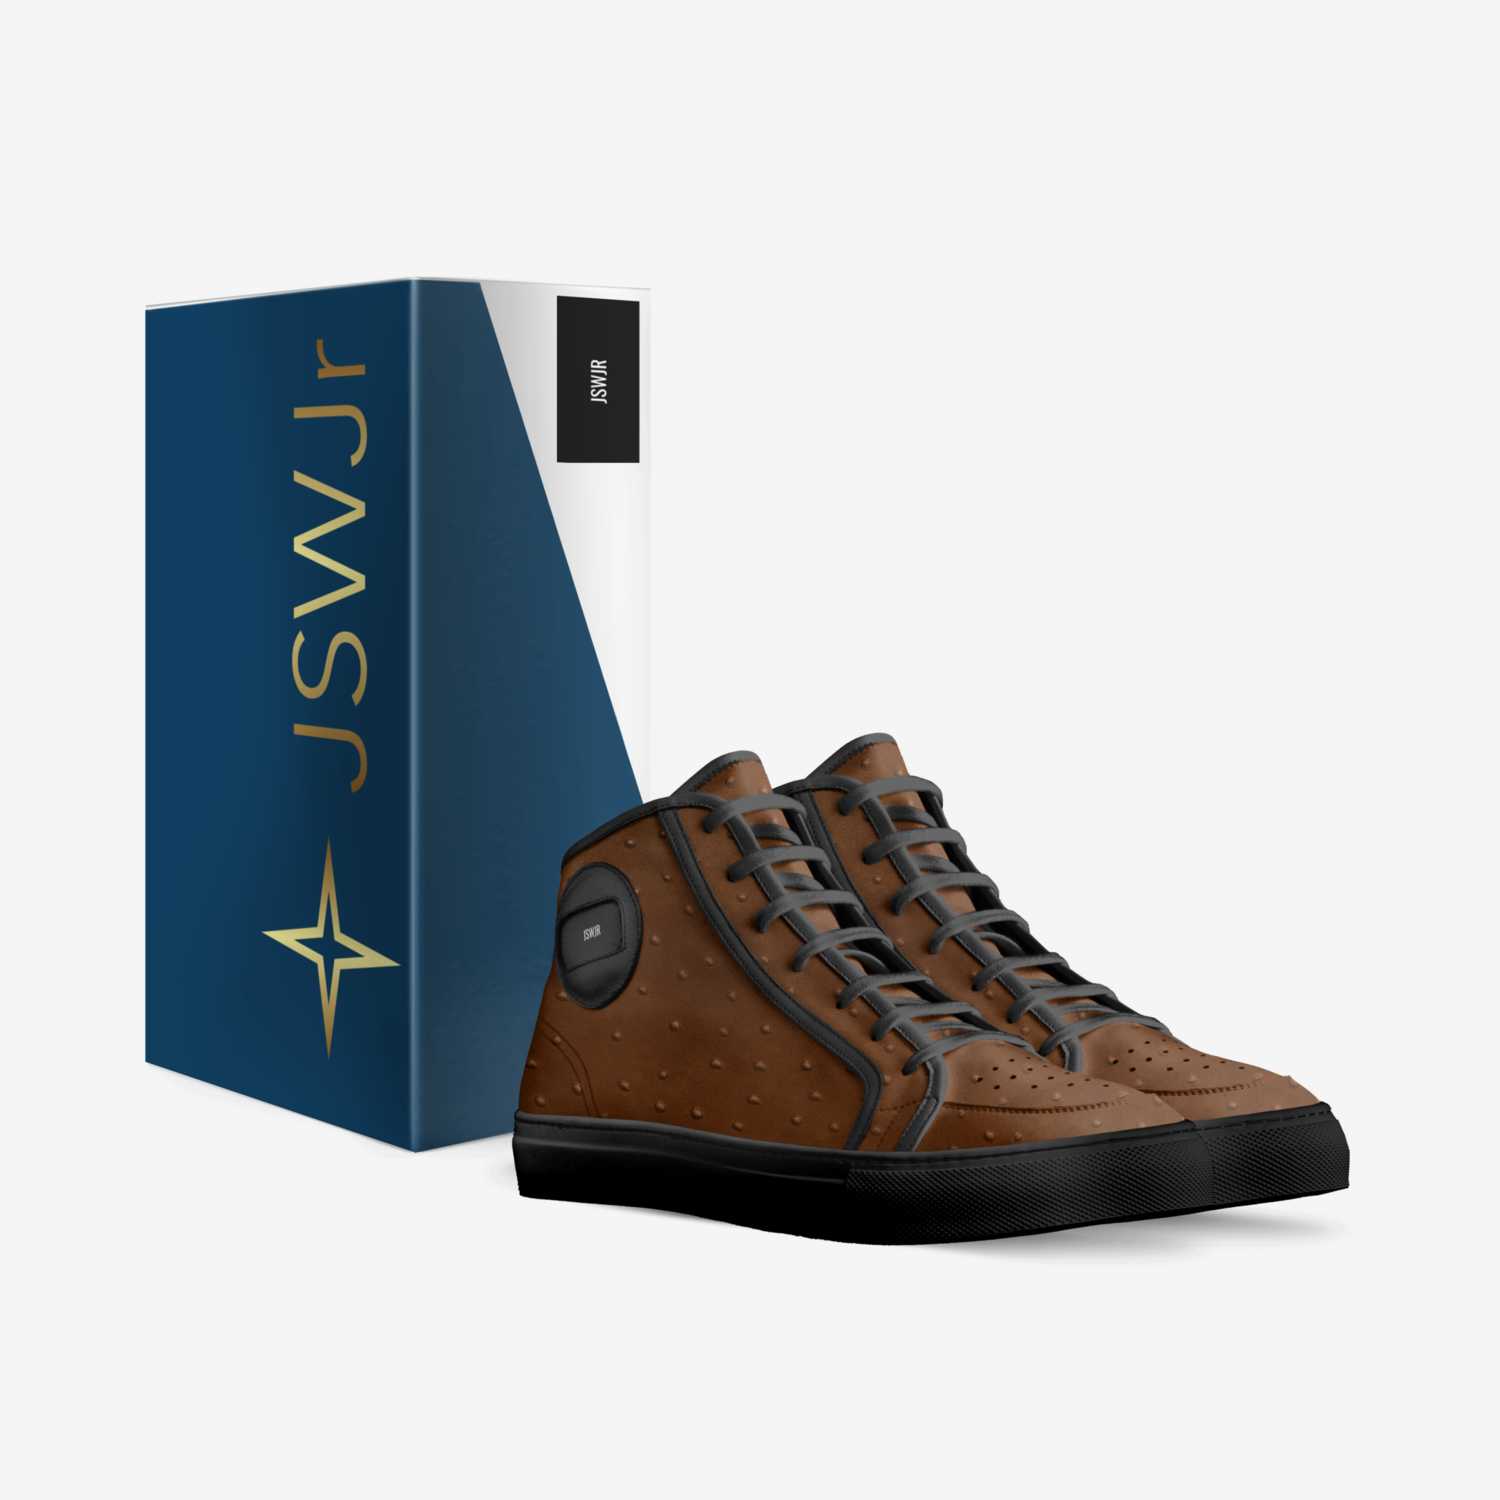 OstrichStreet custom made in Italy shoes by Joseph Williams | Box view